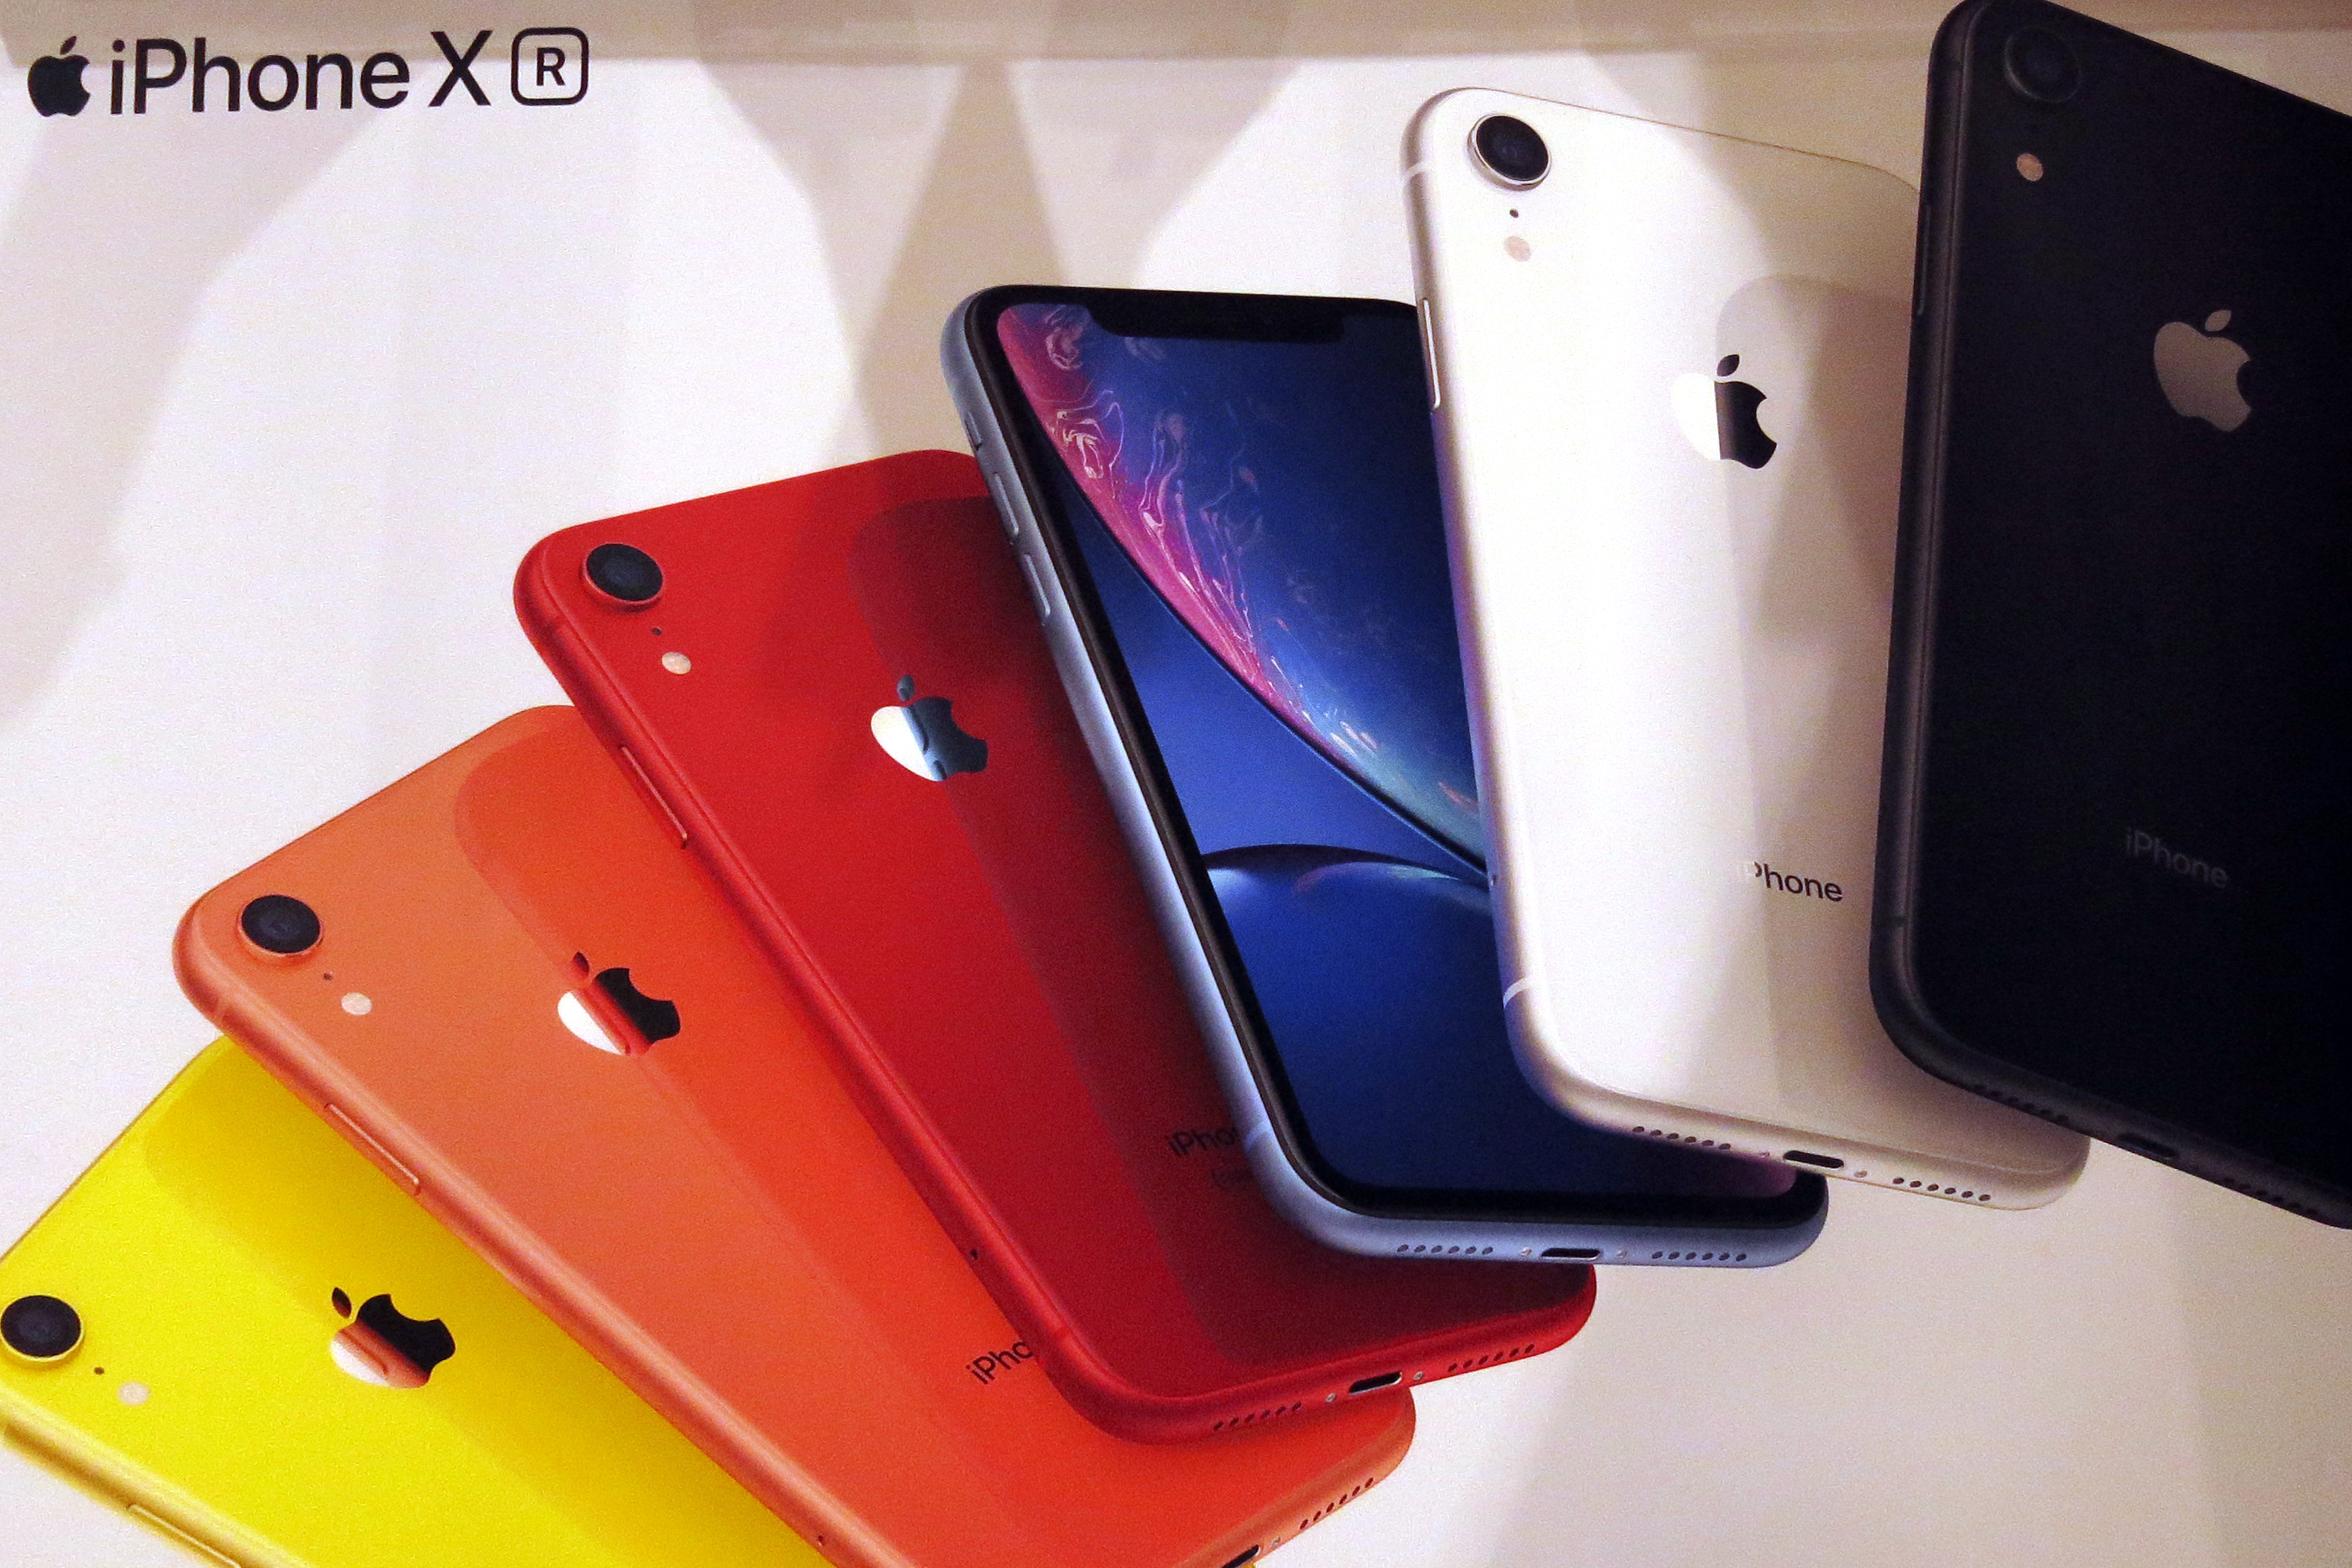 Apple has filed model numbers for 3 new iPhones, including the XR2